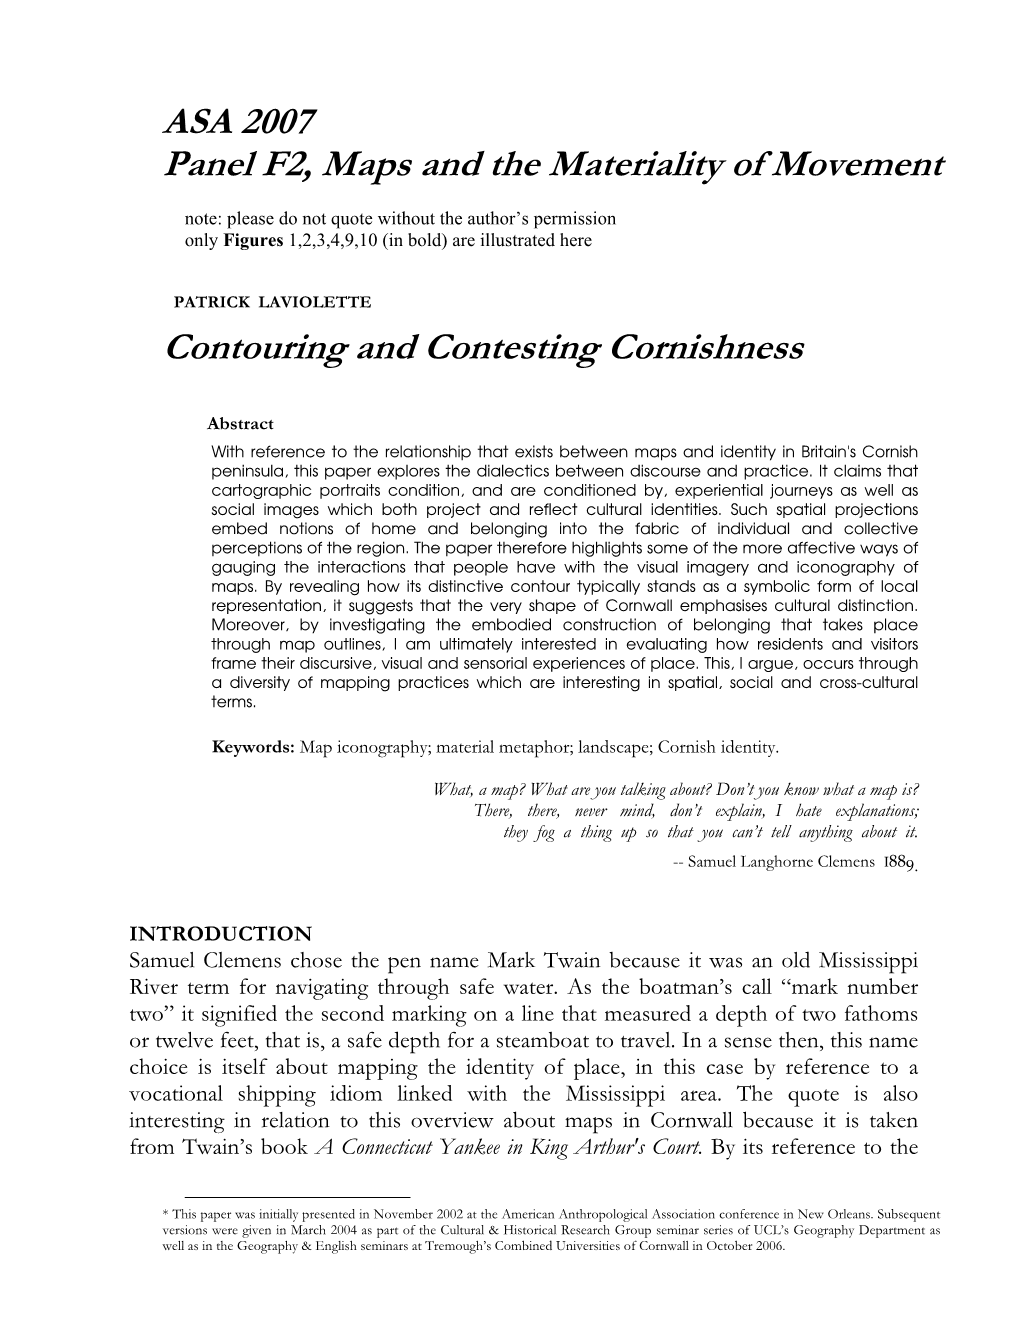 ASA 2007 Panel F2, Maps and the Materiality of Movement